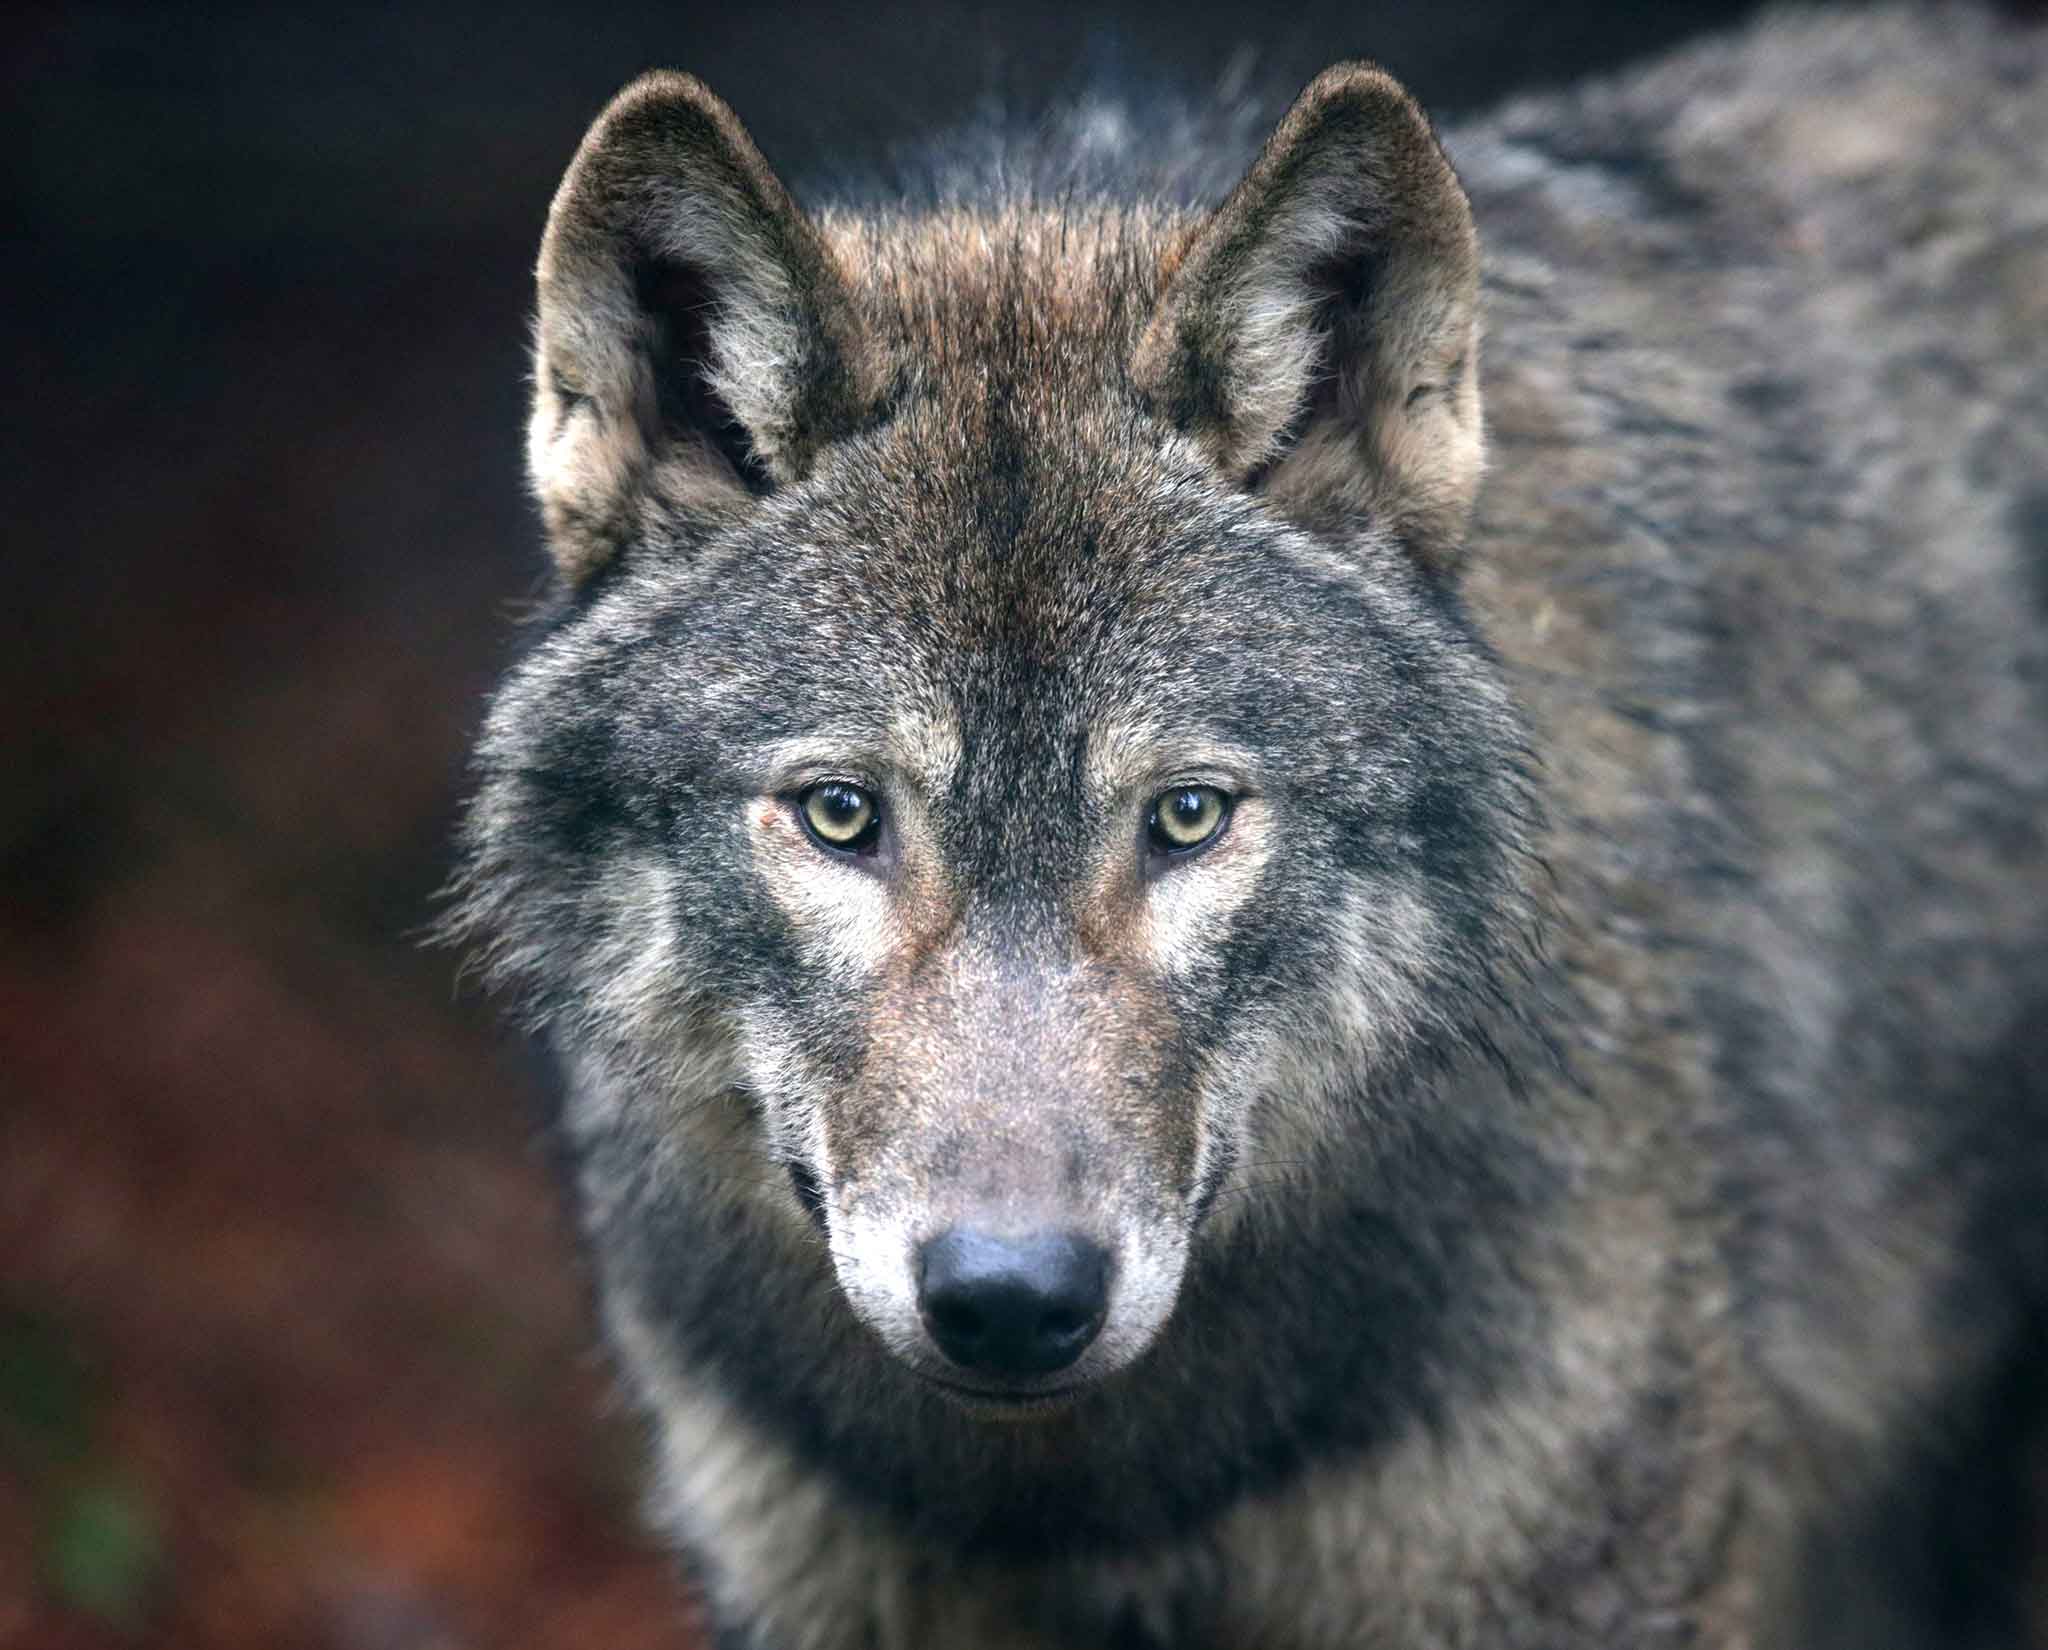 Scotland's rugged mountains and ancient woodlands look like the perfect place to reintroduce predators like the wolf